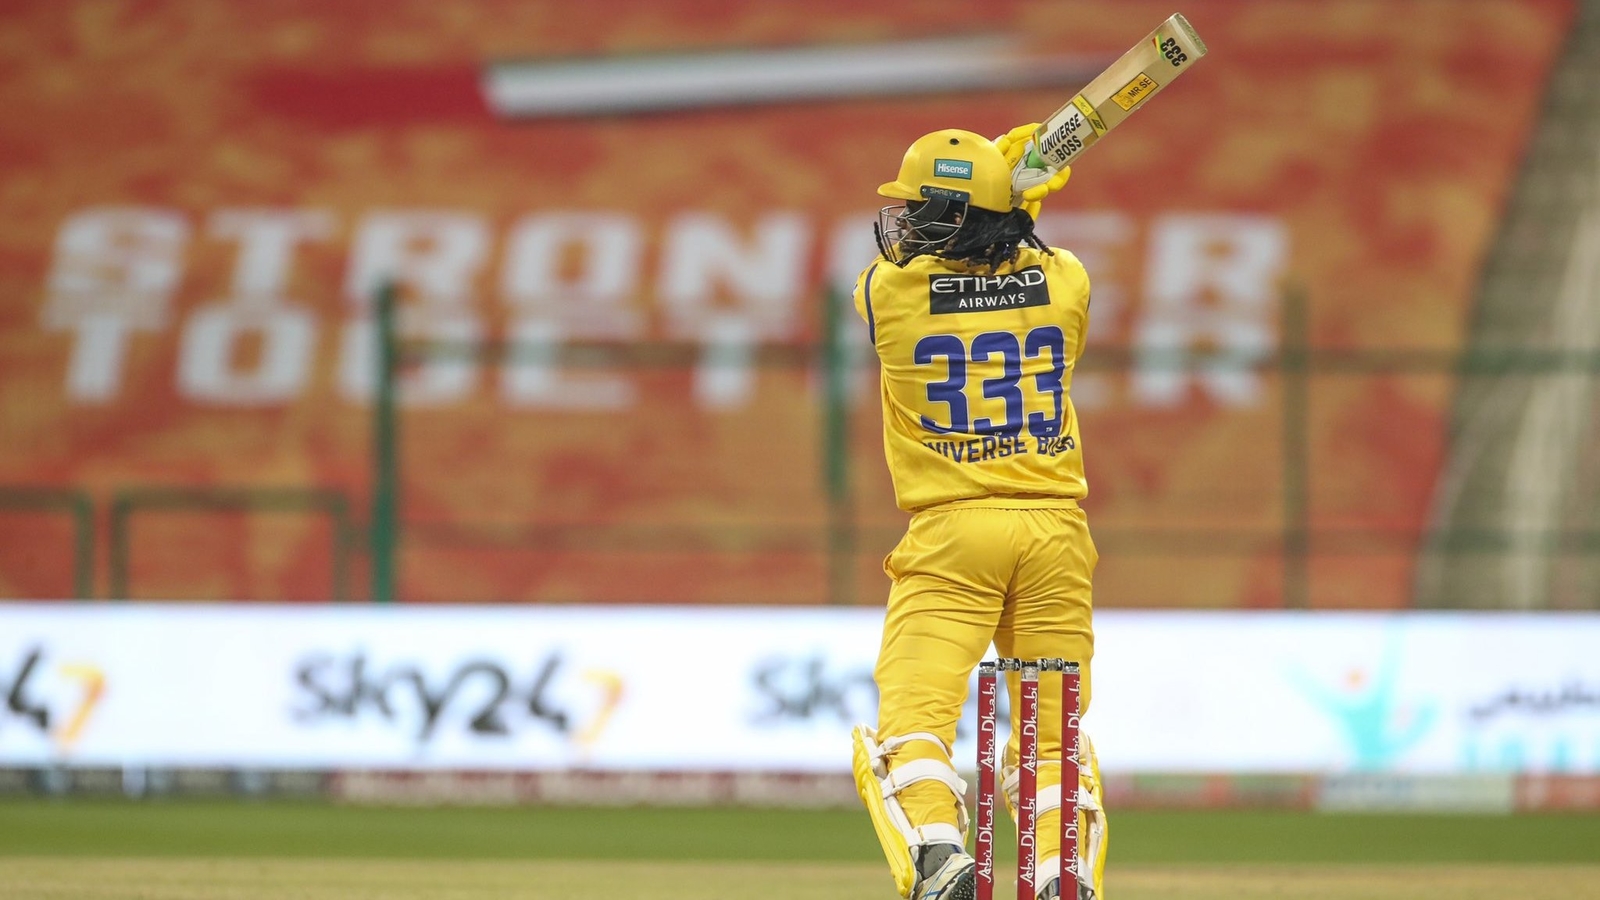 T10 League Chris Gayle smashes 22-ball 84*, scores joint-fastest fifty - WATCH Cricket